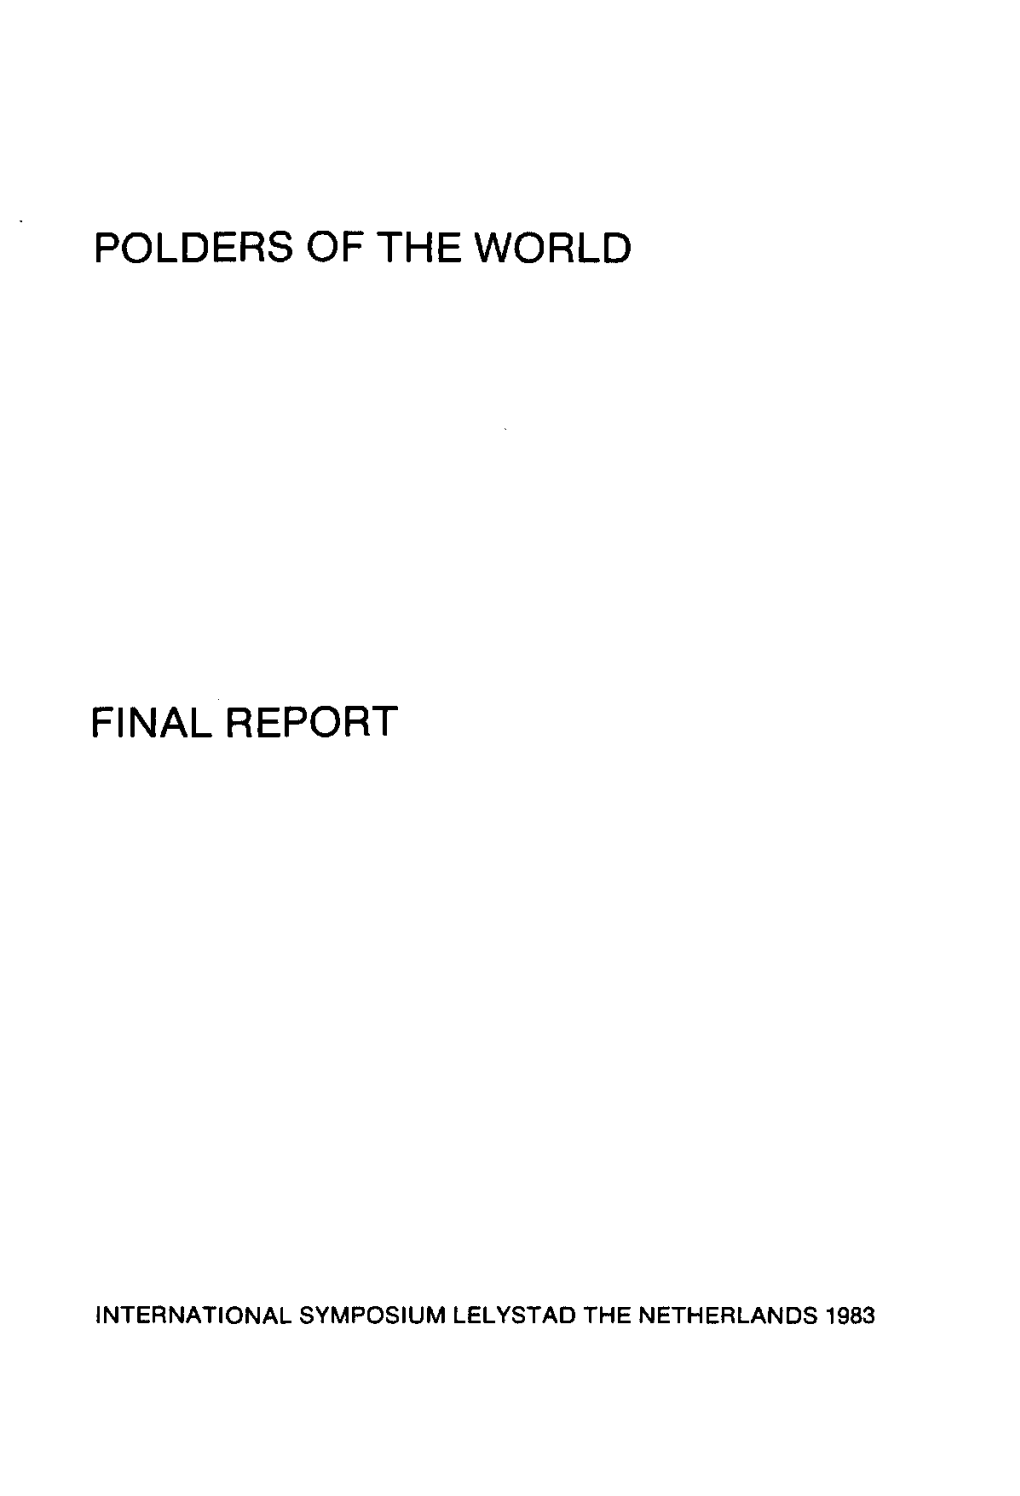 Polders of the World Final Report